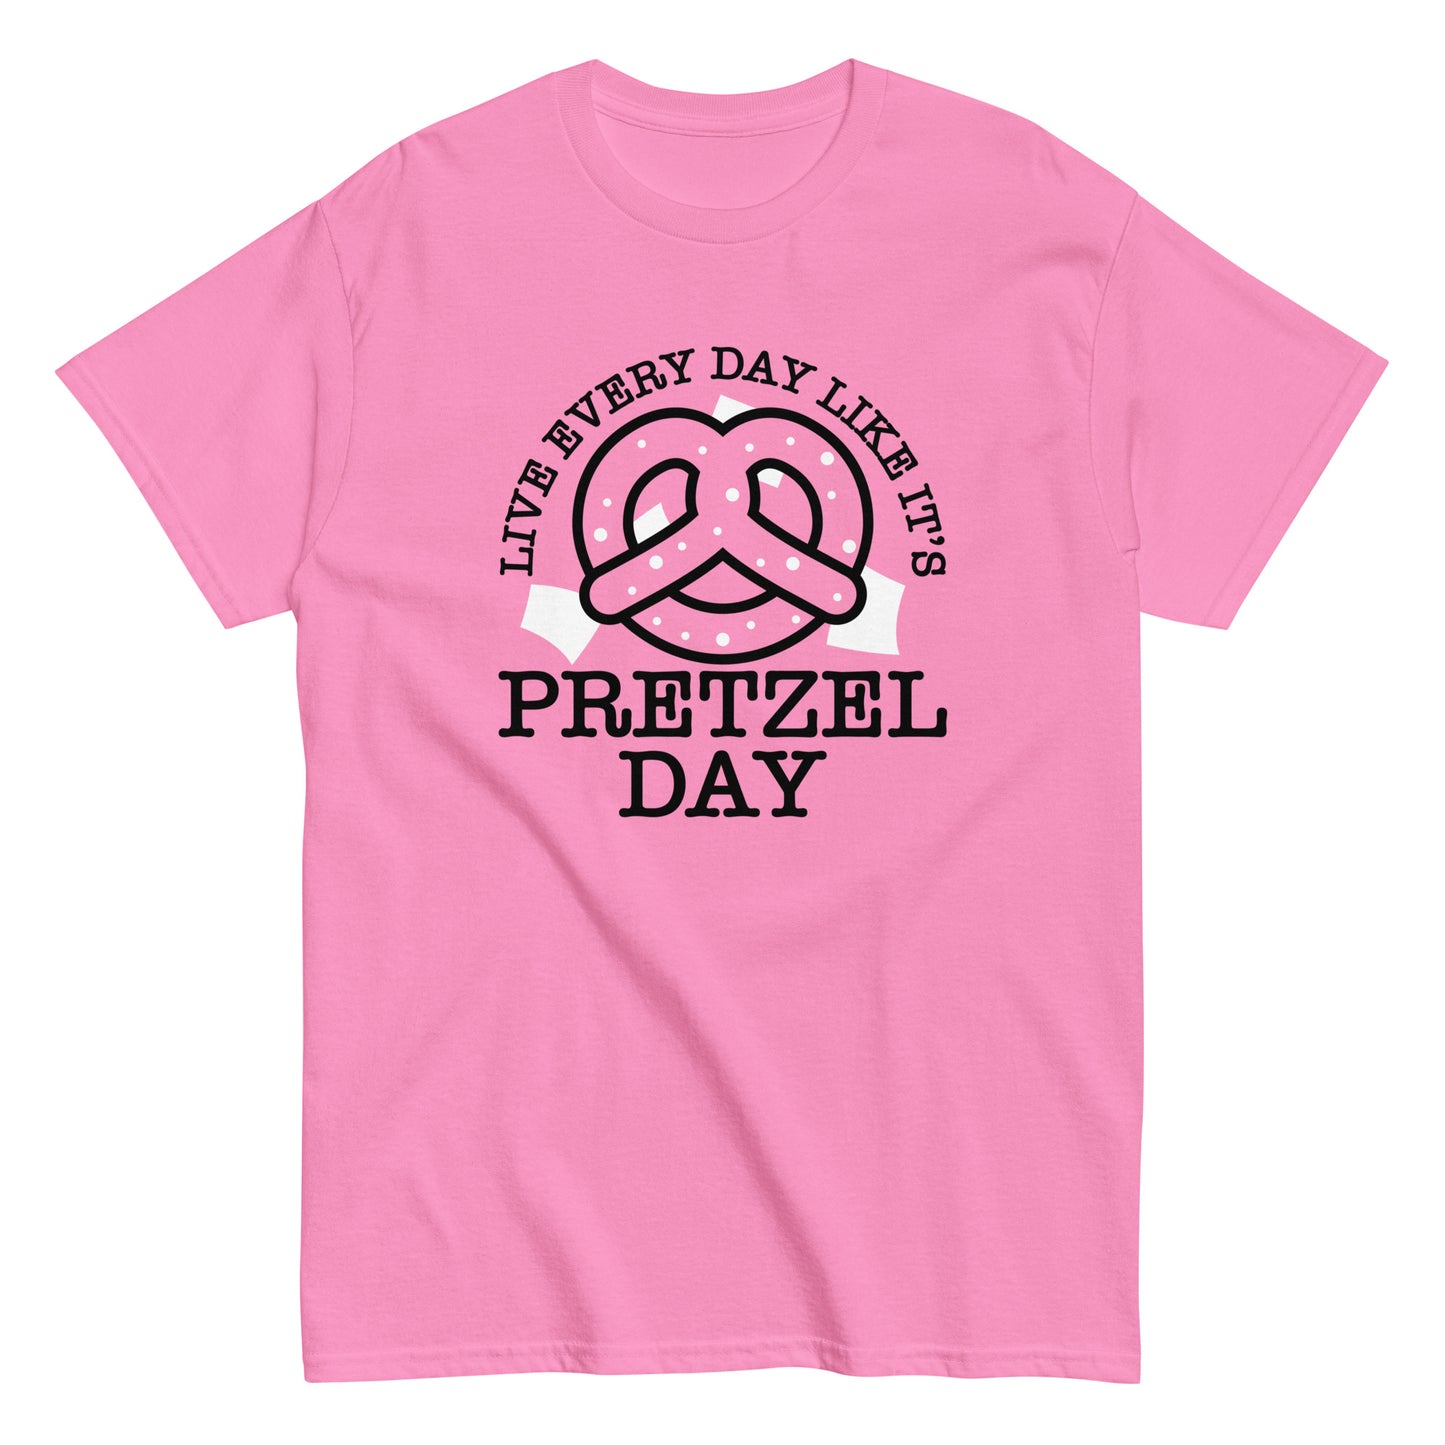 Live Every Day Like It's Pretzel Day Men's Classic Tee